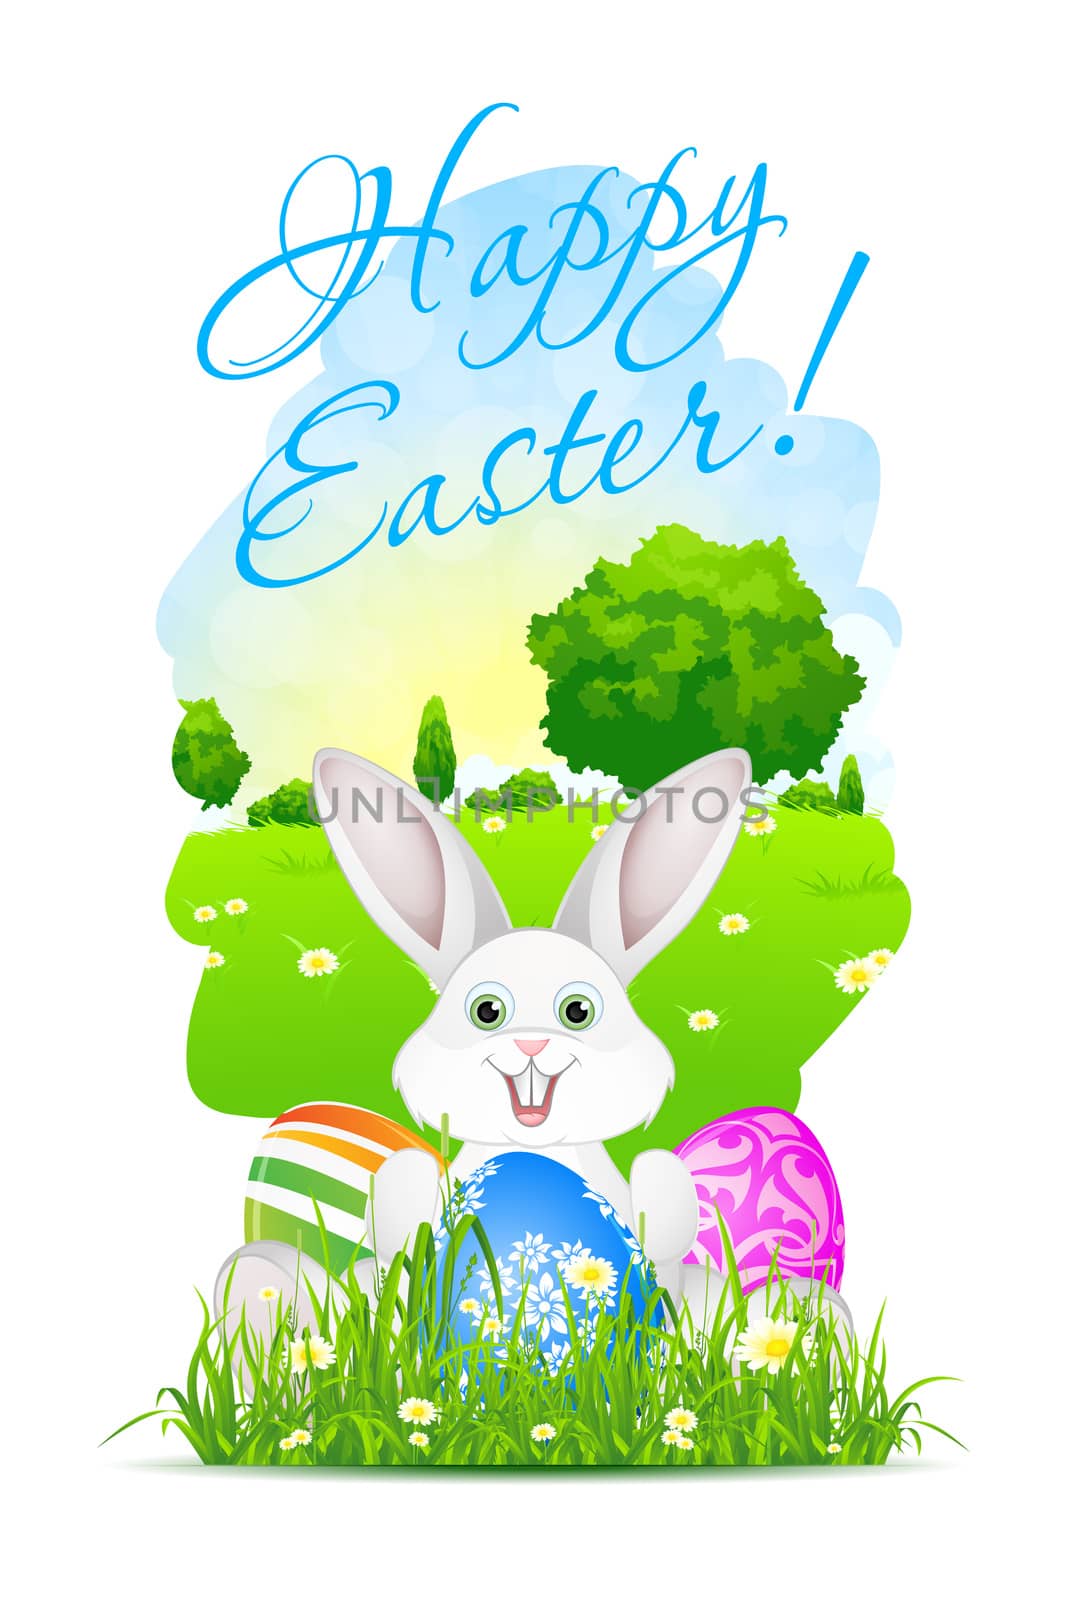 Easter Card with Landscape, Rabbit and Decorated Eggs by WaD